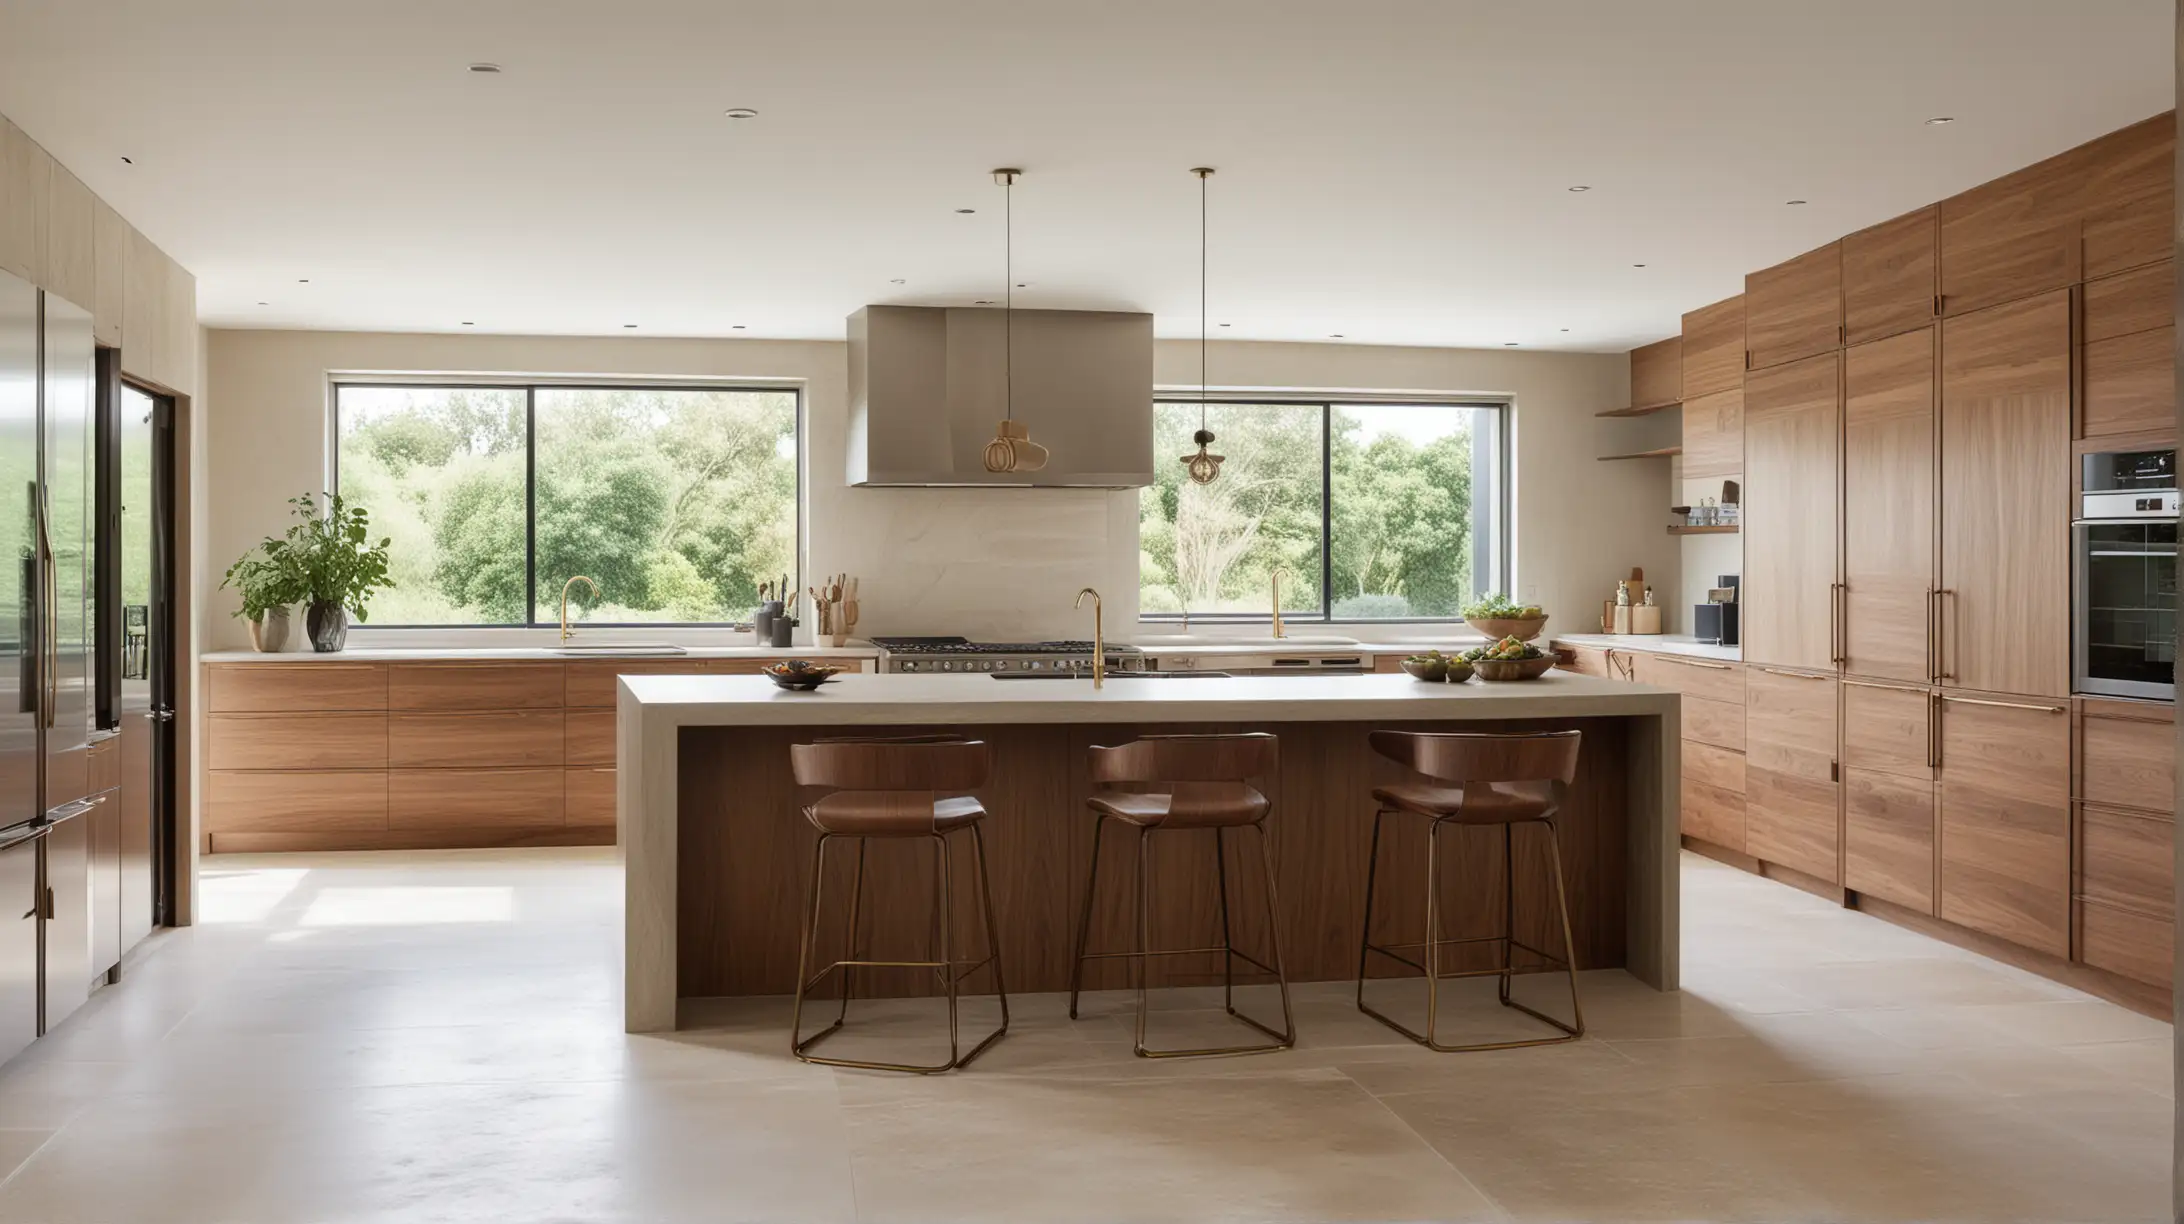 a large minimalist organic estate home chefs kitchen; limestone floor, walnut wood cabinets, limewash painted walls, brass handles and picture railing
